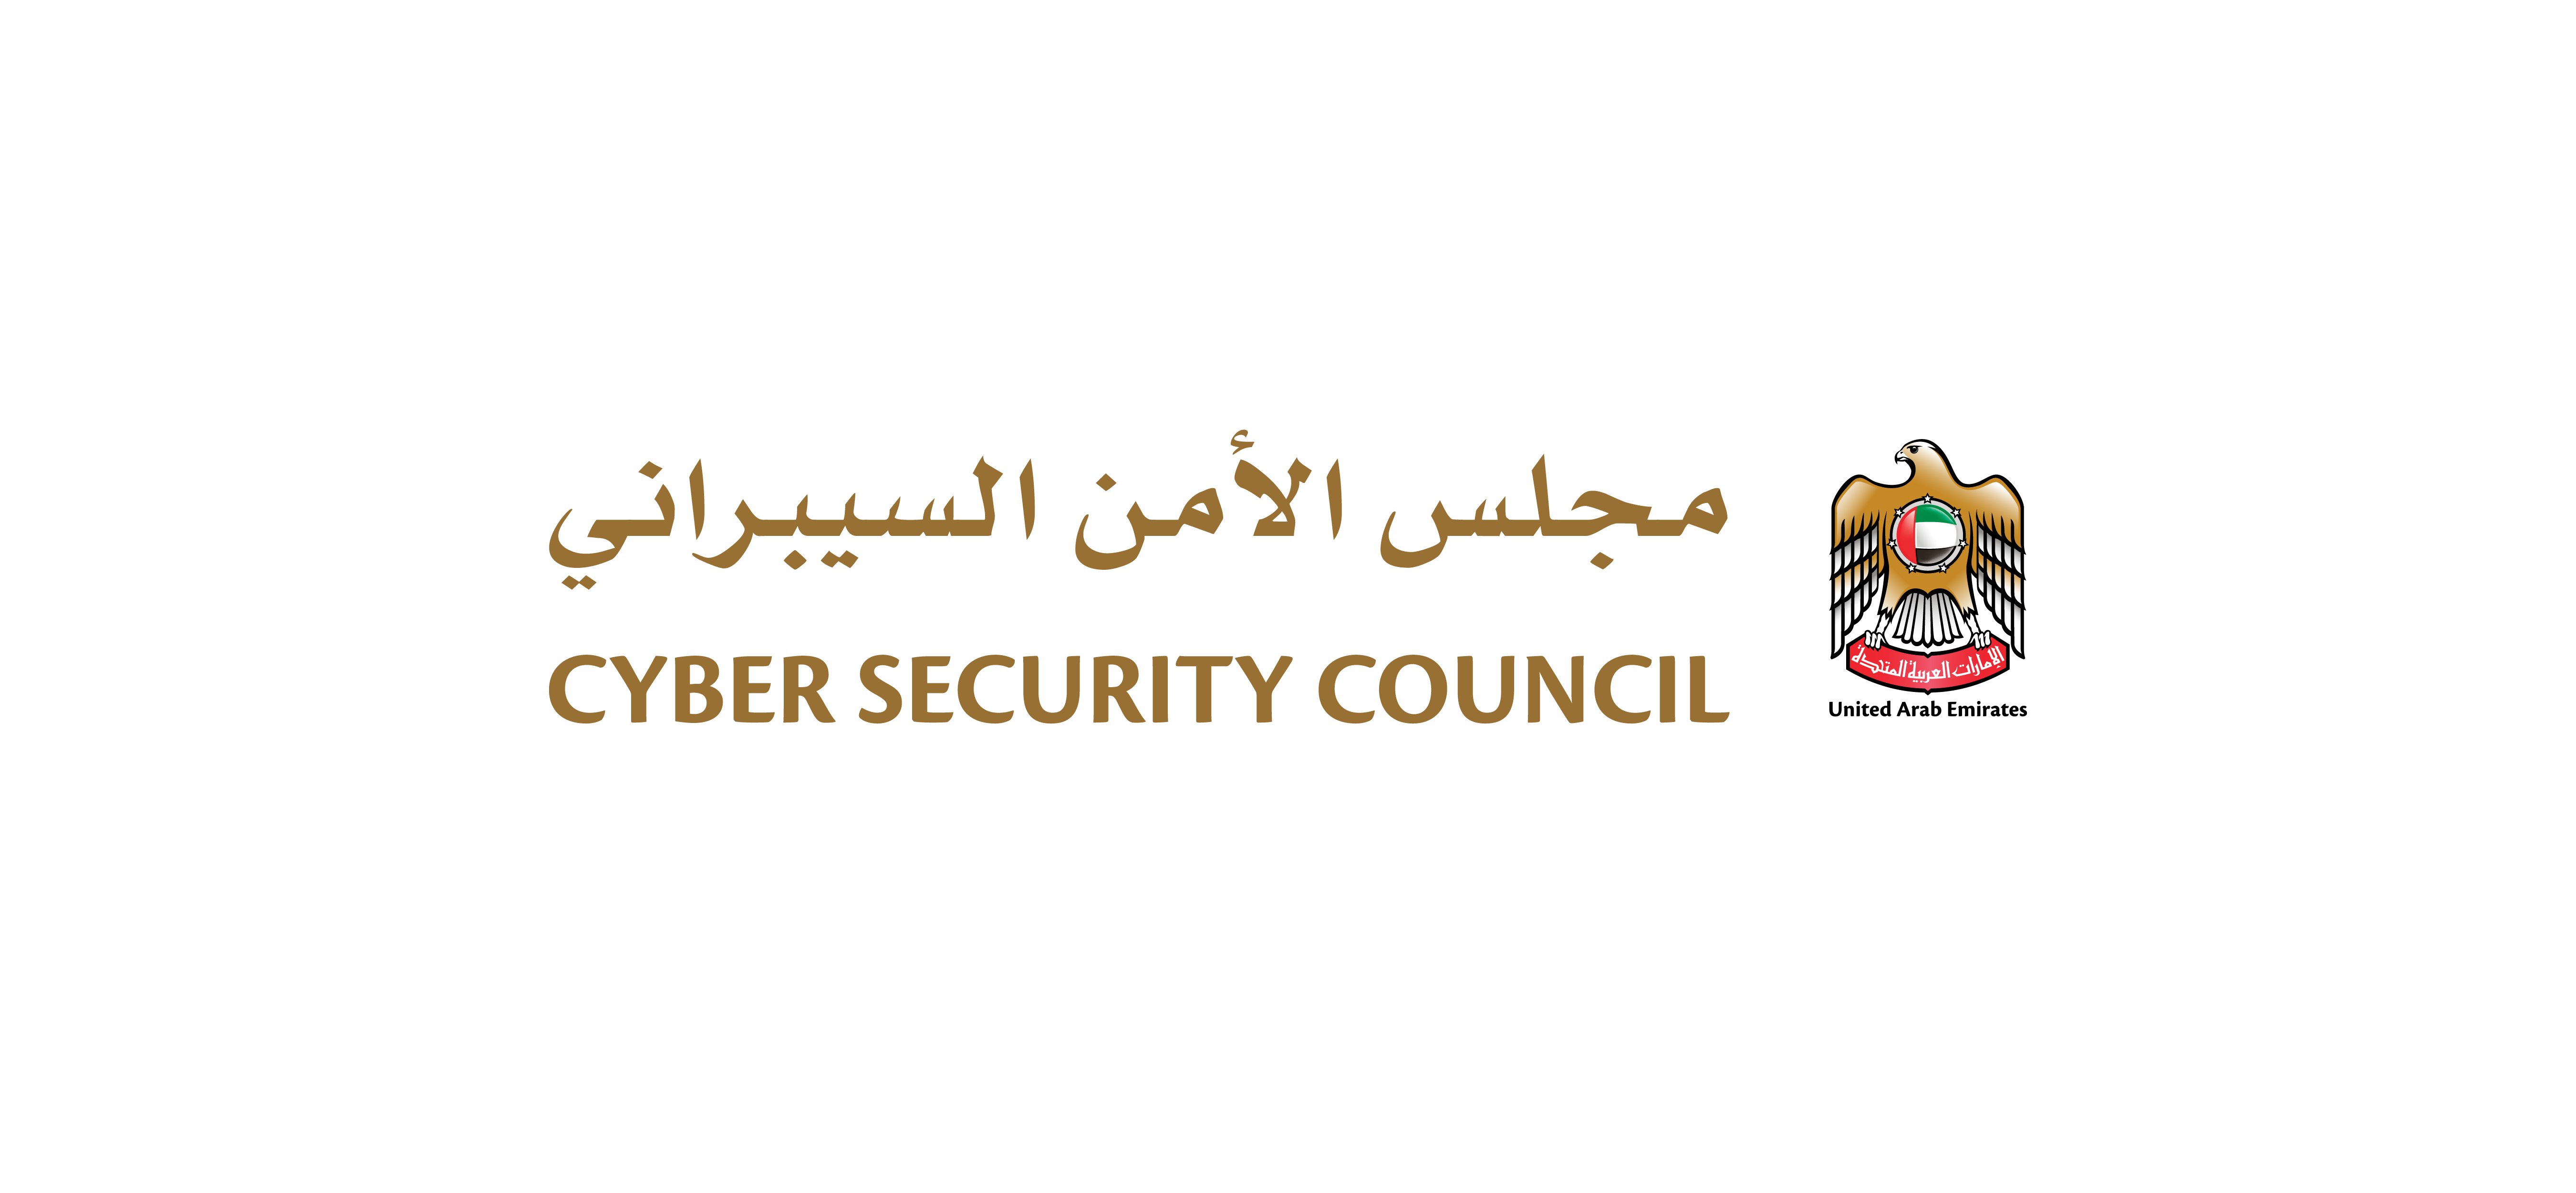 Head Of The Cyber Security Council: The Approval Of National Policies In The Field Of Cyber Security Strengthens The Regulatory Framework Of The State In This Vital Sector.